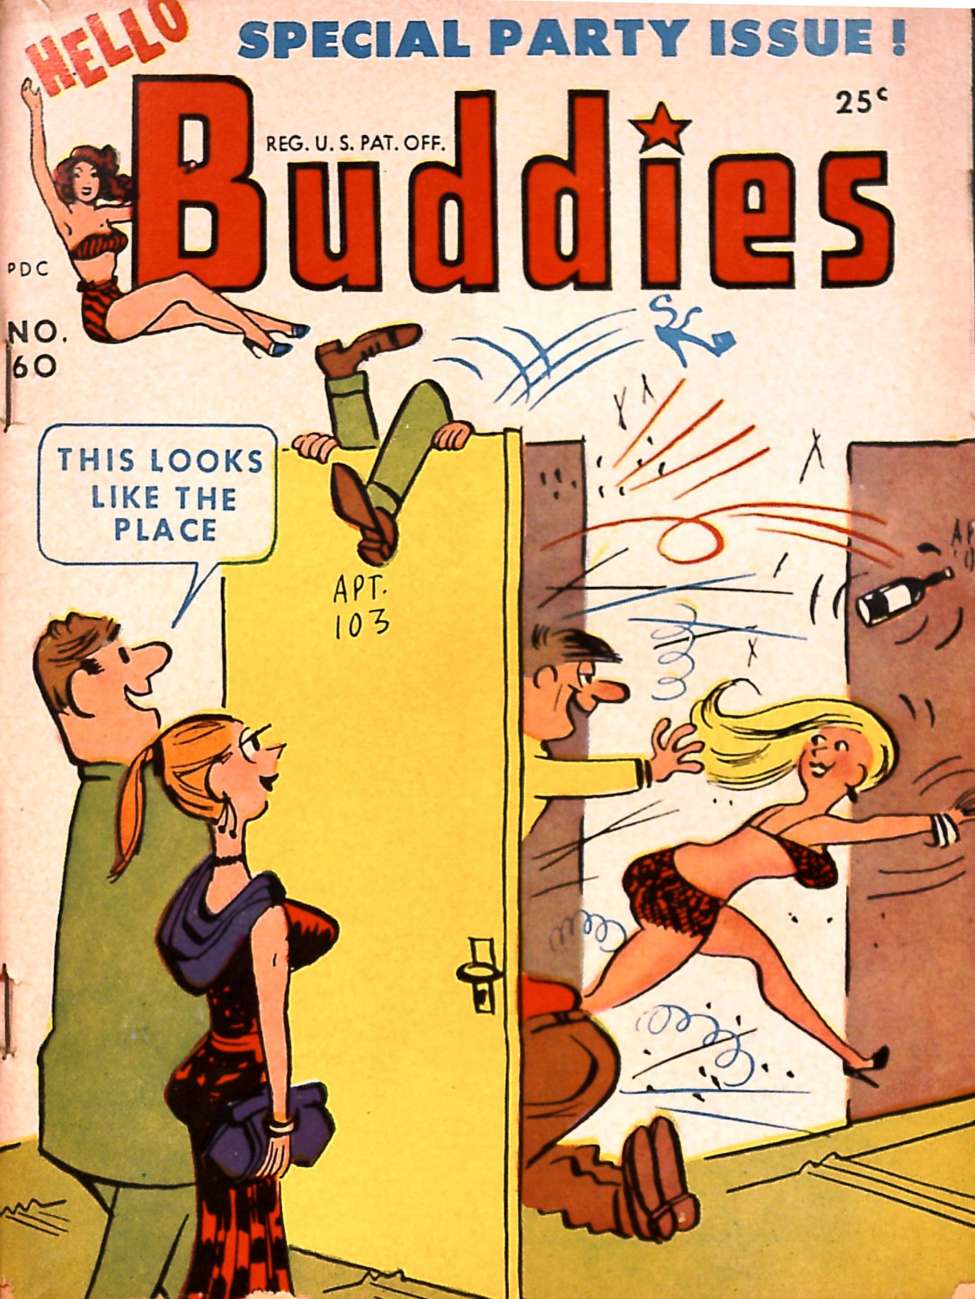 Book Cover For Hello Buddies 60